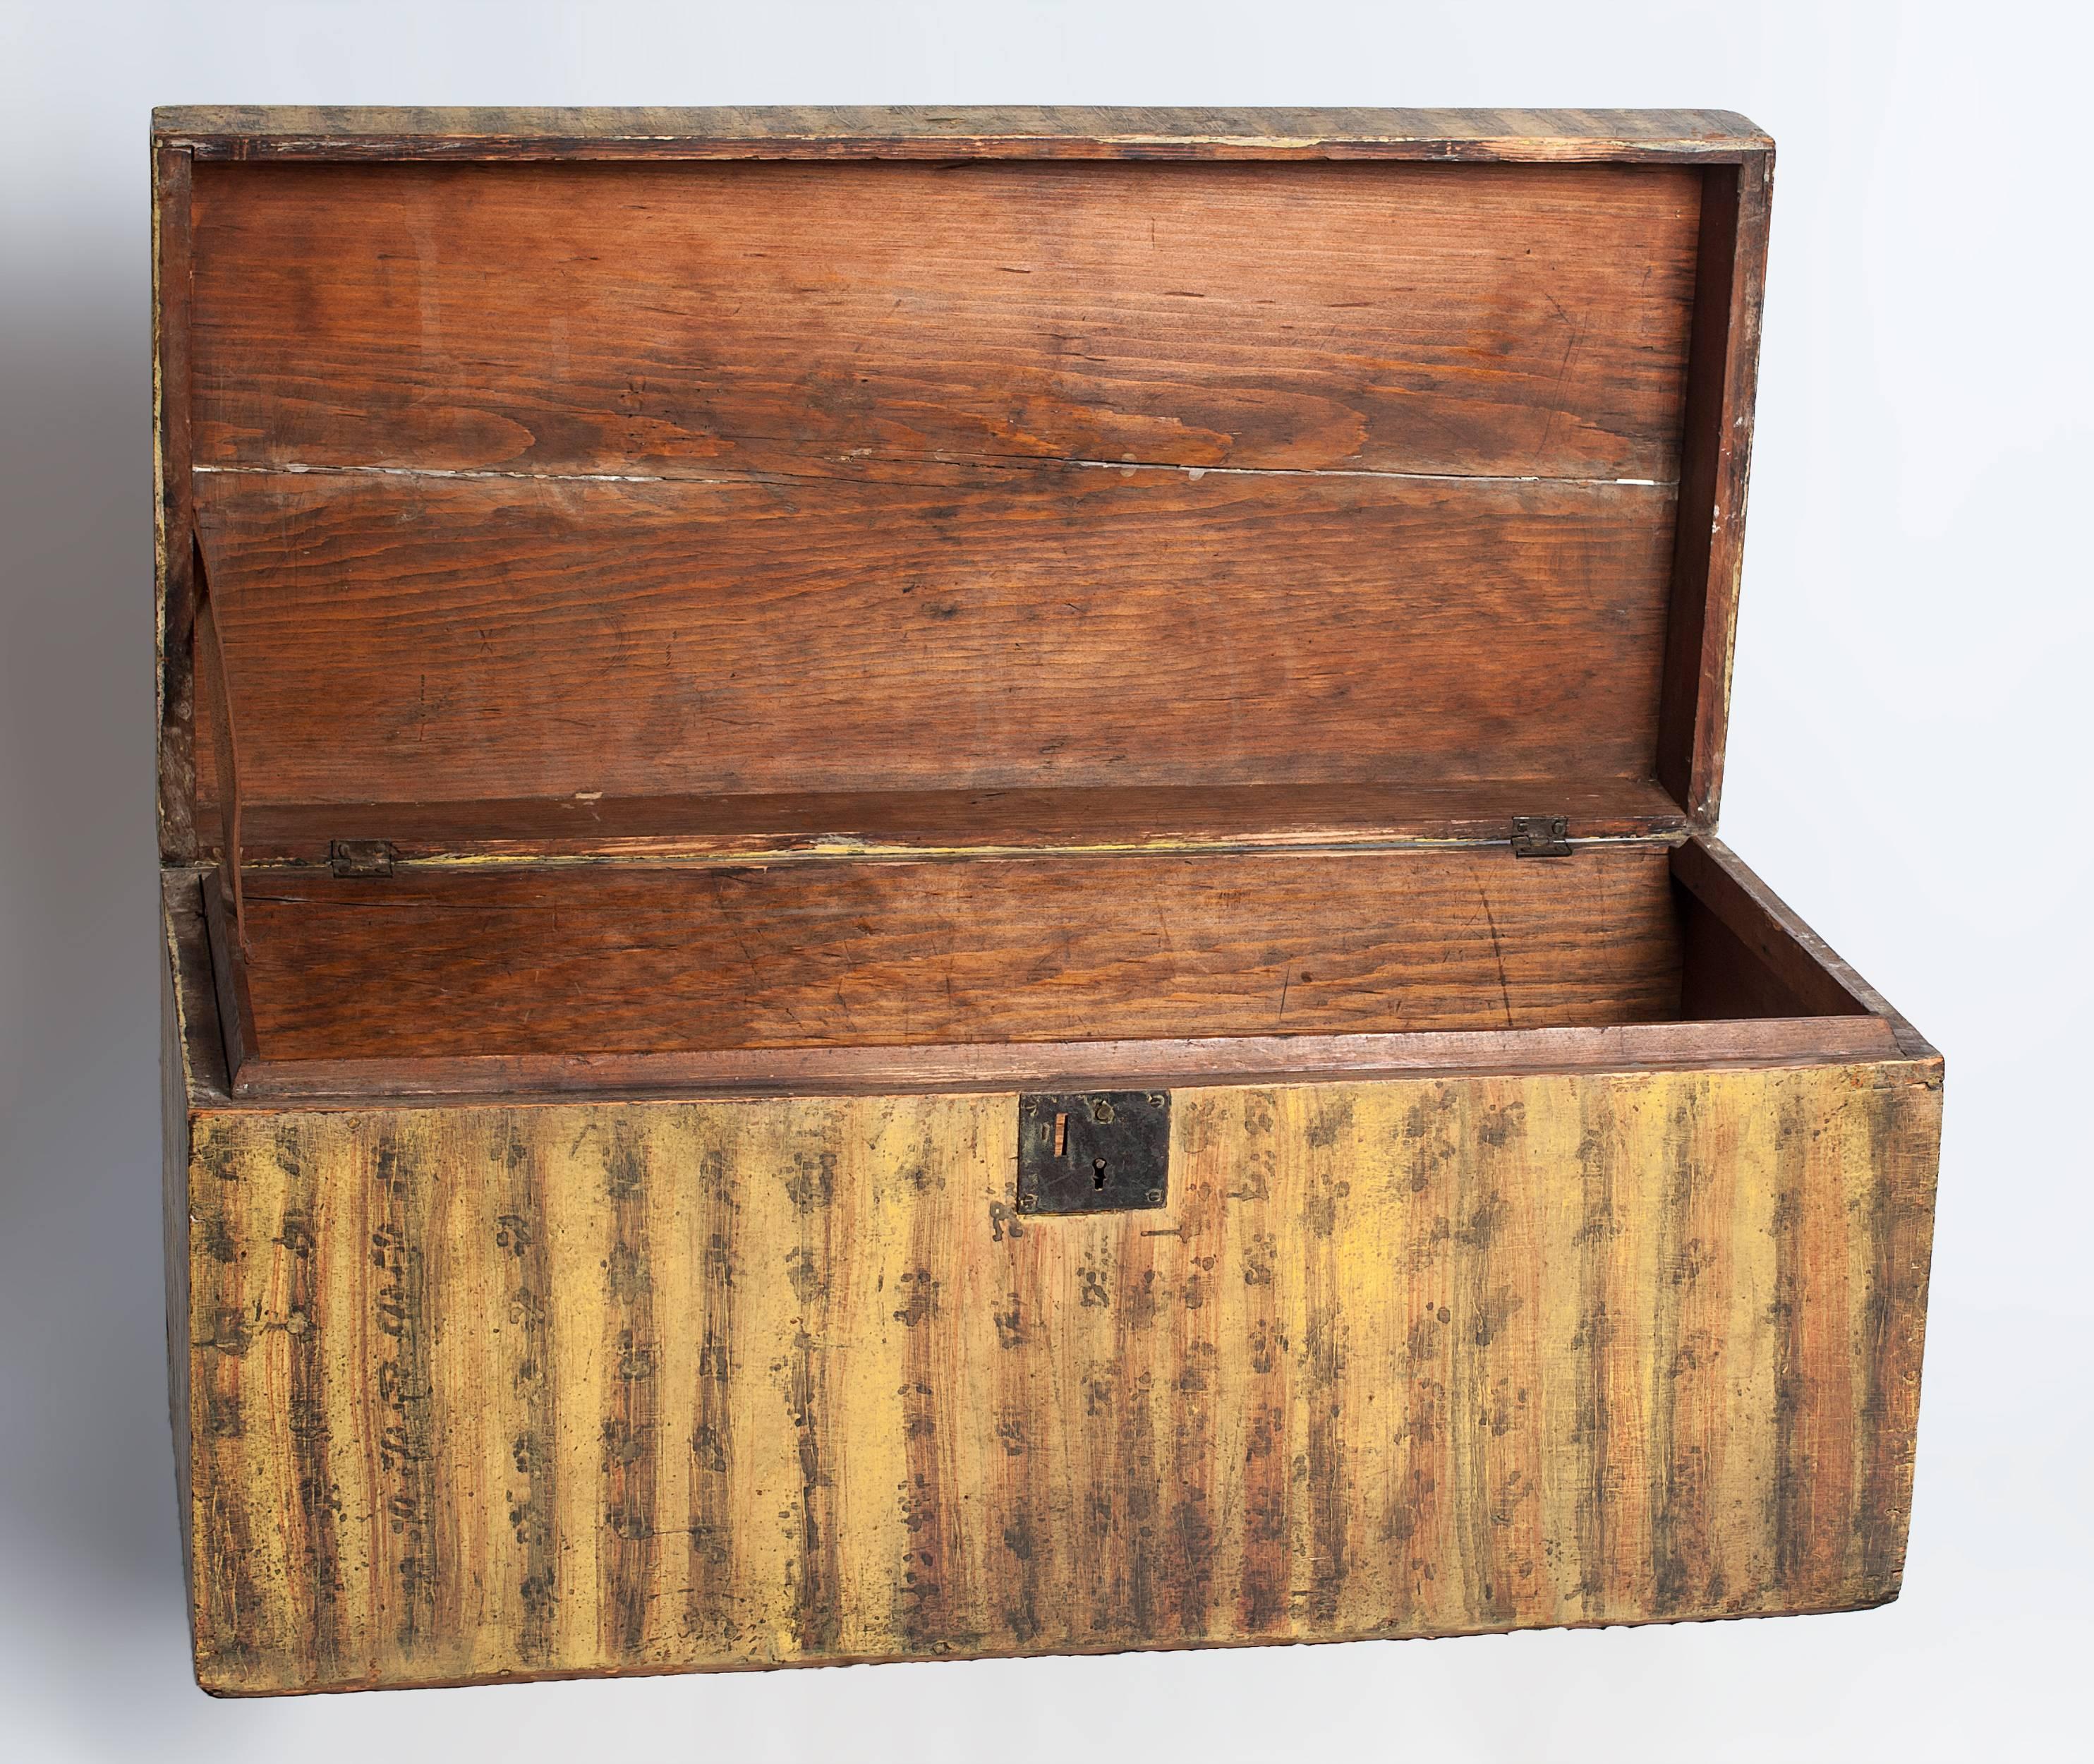 Painted decorated blanket box. Retaining its original yellow and red sponge decoration with black highlights.Made from Pine with rosehead nails

New England, c.1850 15 ¾” 35 ½” 16 ½